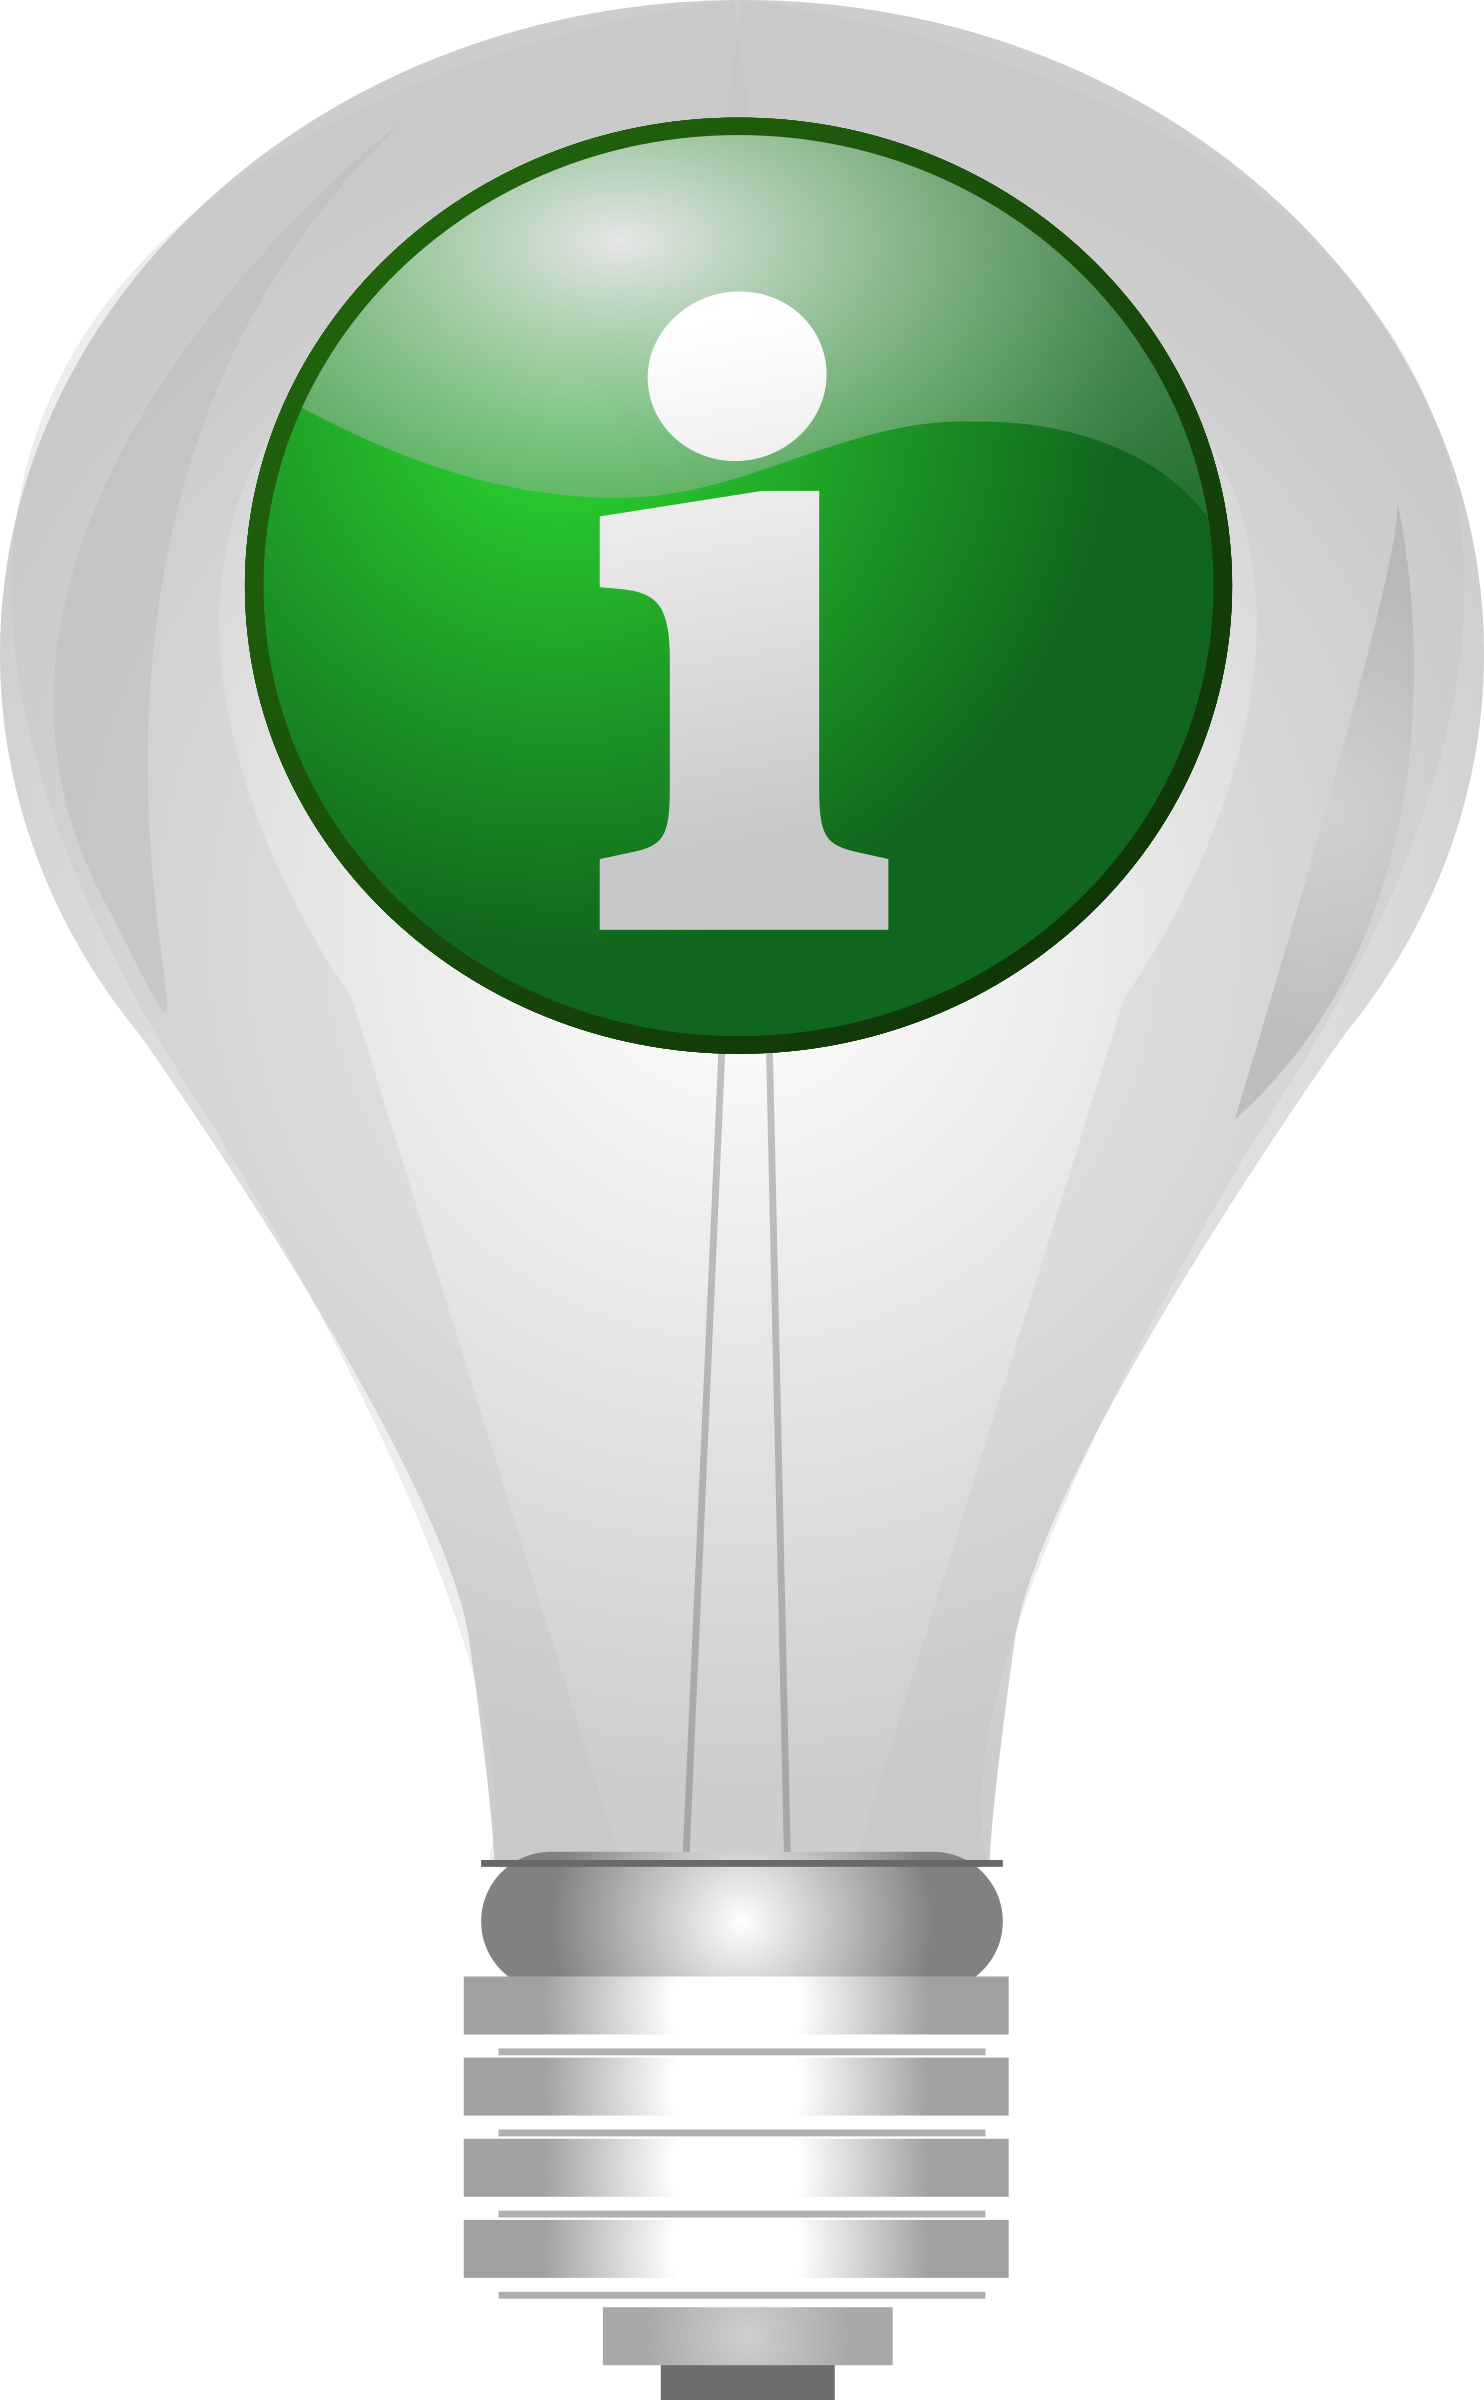 A Light Bulb With A Green Circle And A Number On It